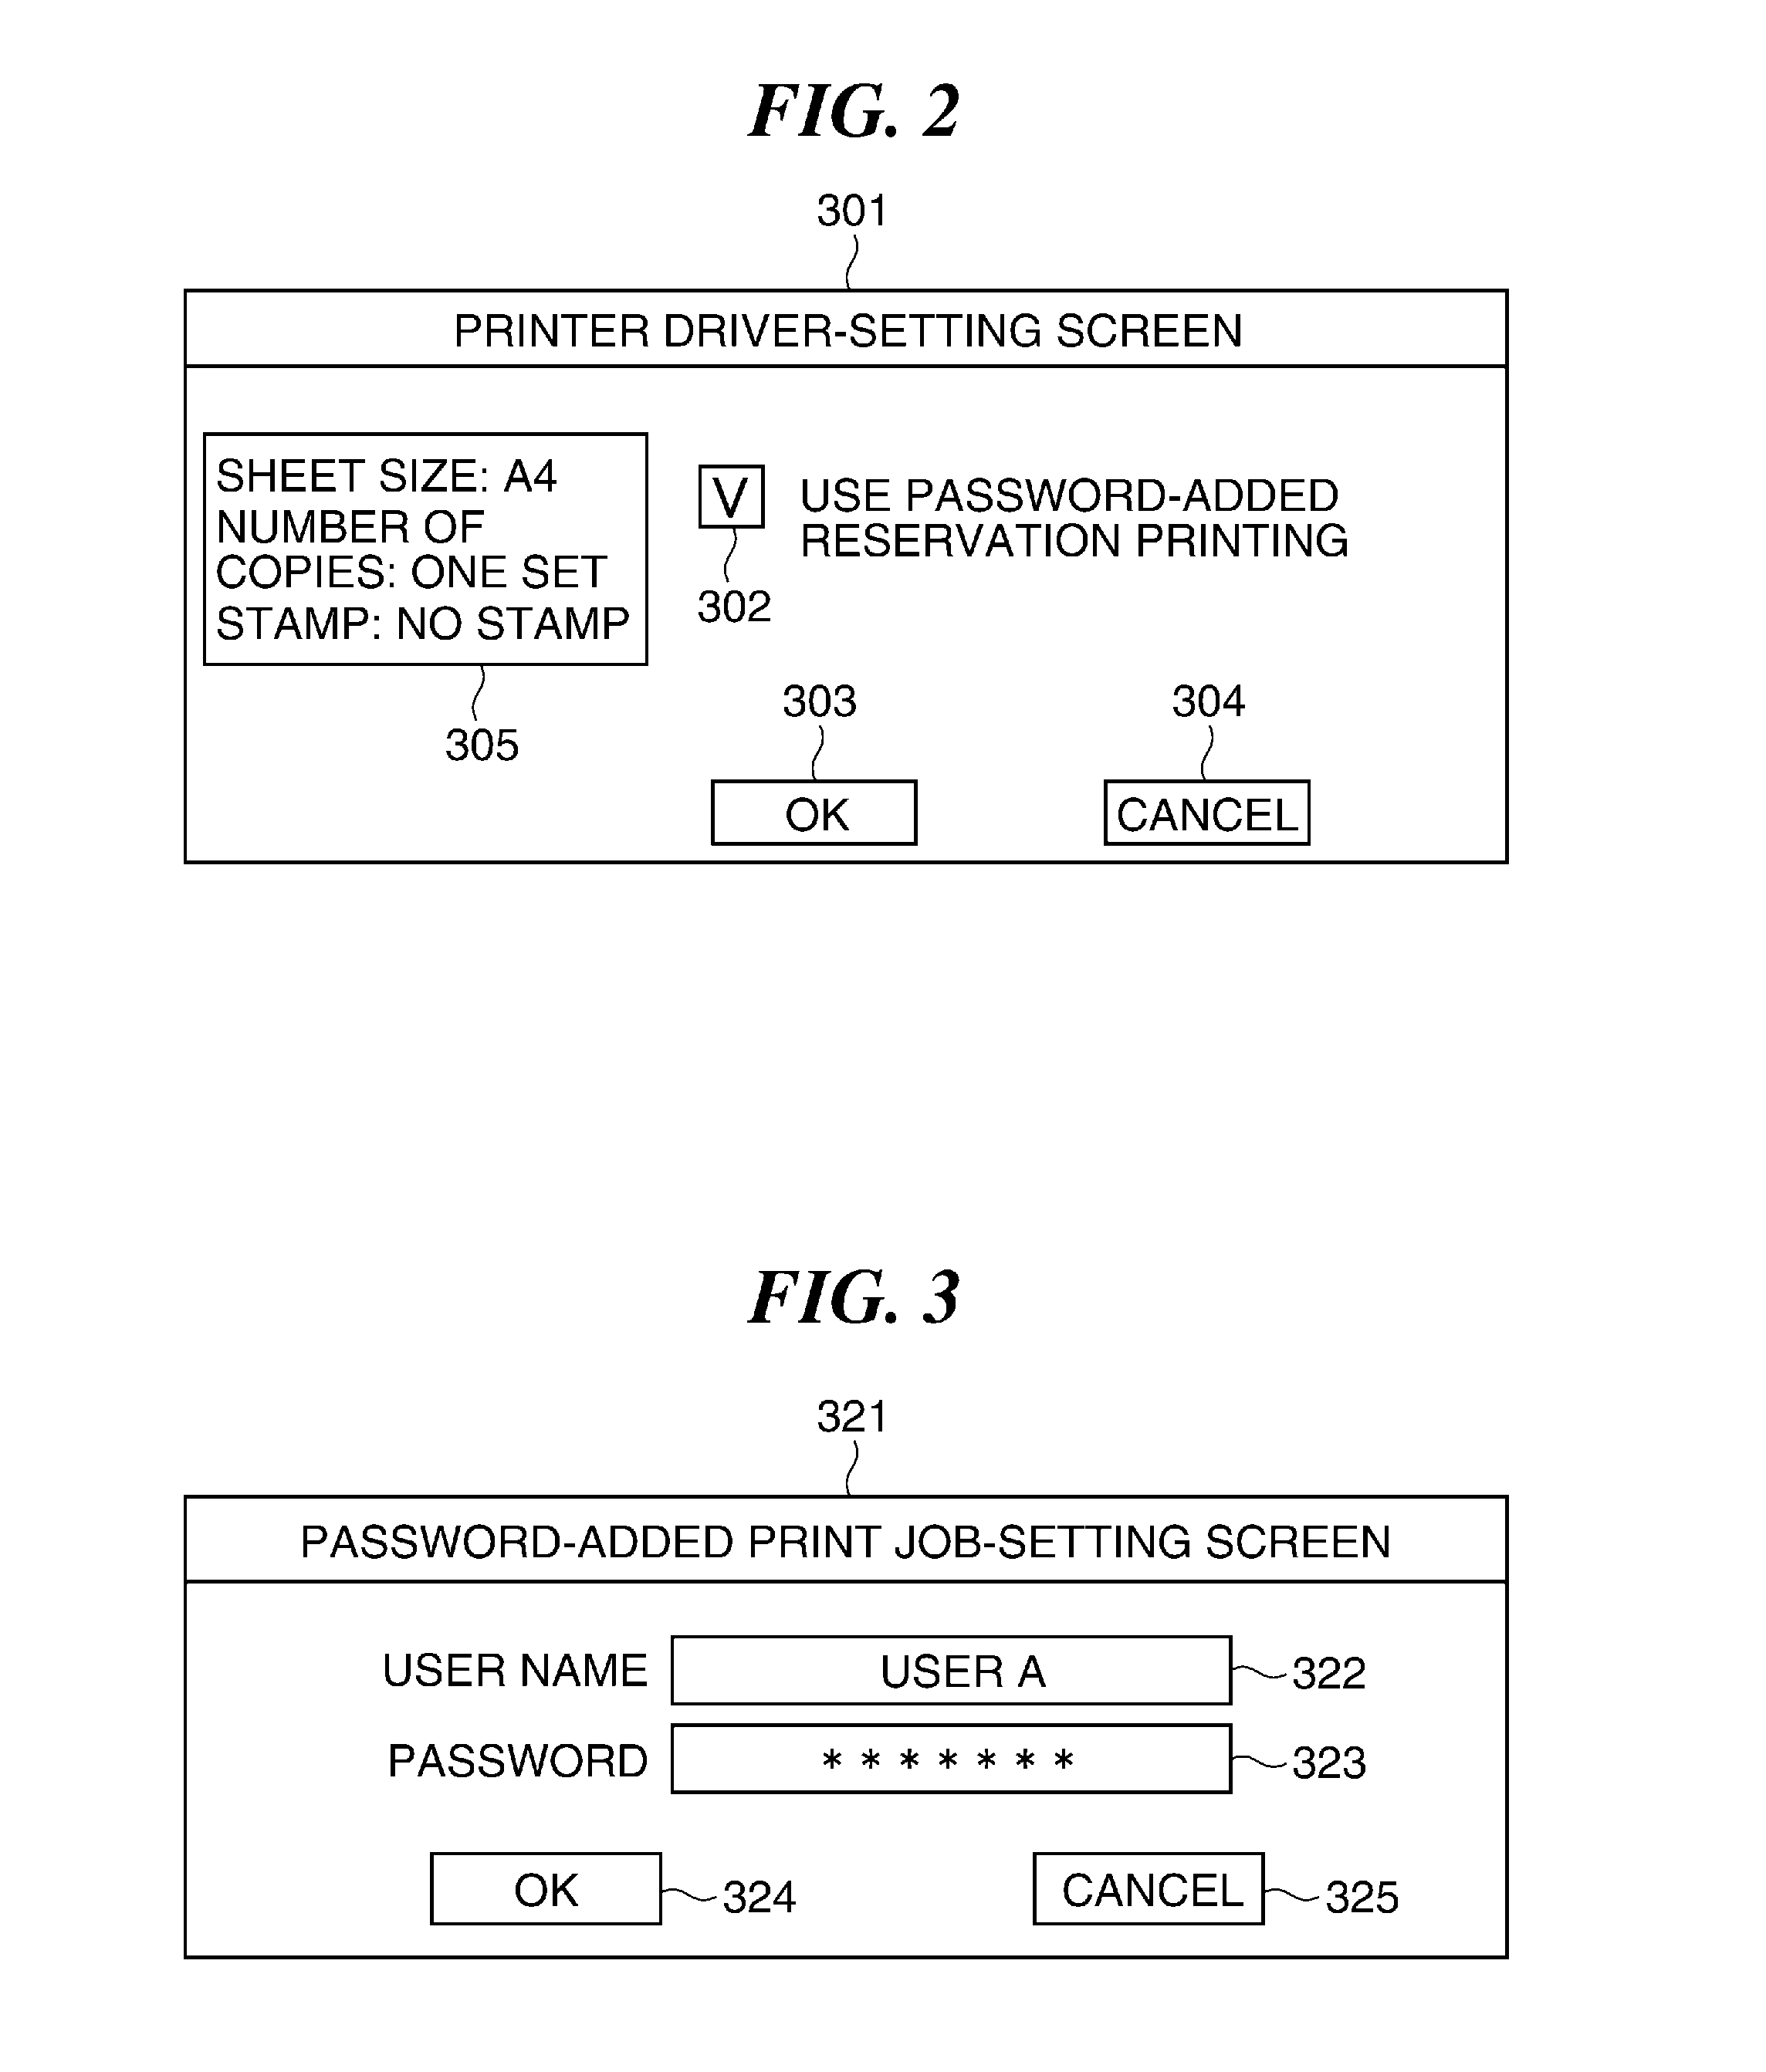 Image forming apparatus capable of reducing security risk, method of controlling image forming apparatus, system including image forming apparatus, and storage medium